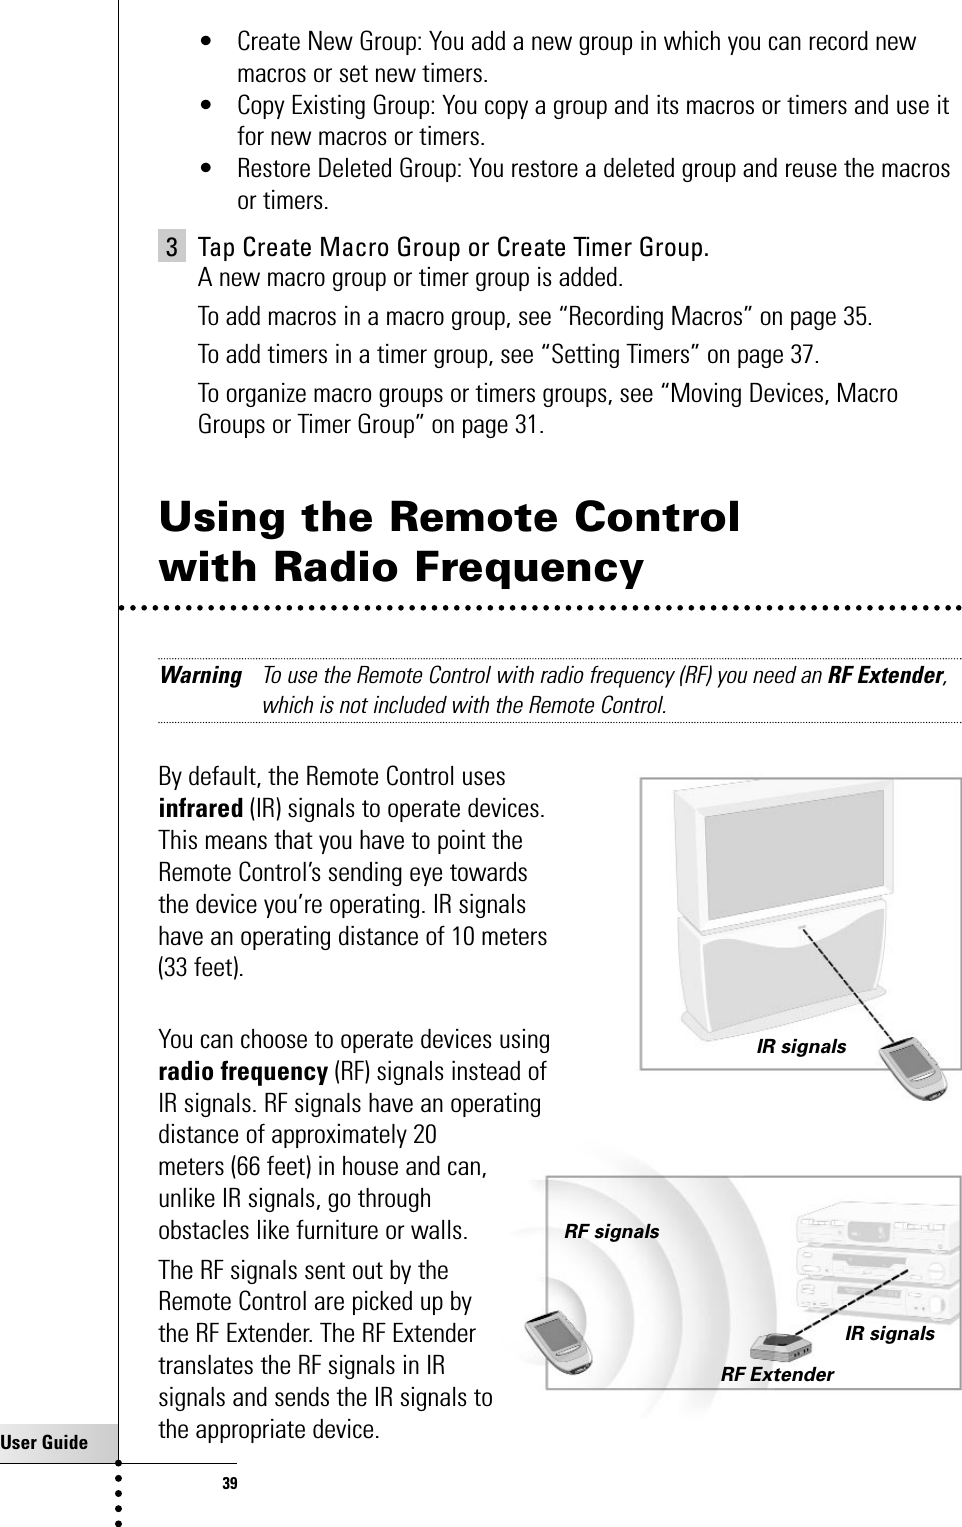 User Guide39Getting the Maximum out of it• Create New Group: You add a new group in which you can record newmacros or set new timers.• Copy Existing Group: You copy a group and its macros or timers and use itfor new macros or timers.• Restore Deleted Group: You restore a deleted group and reuse the macrosor timers.3 Tap Create Macro Group or Create Timer Group.A new macro group or timer group is added.To add macros in a macro group, see “Recording Macros” on page 35.To add timers in a timer group, see “Setting Timers” on page 37.To organize macro groups or timers groups, see “Moving Devices, MacroGroups or Timer Group” on page 31.Using the Remote Control with Radio FrequencyWarning To use the Remote Control with radio frequency (RF) you need an RF Extender,which is not included with the Remote Control.By default, the Remote Control uses infrared (IR) signals to operate devices. This means that you have to point the Remote Control’s sending eye towards the device you’re operating. IR signals have an operating distance of 10 meters (33 feet).You can choose to operate devices usingradio frequency (RF) signals instead of IR signals. RF signals have an operatingdistance of approximately 20meters (66 feet) in house and can,unlike IR signals, go throughobstacles like furniture or walls.The RF signals sent out by theRemote Control are picked up bythe RF Extender. The RF Extendertranslates the RF signals in IRsignals and sends the IR signals tothe appropriate device. IR signalsRF signalsIR signalsRF Extender